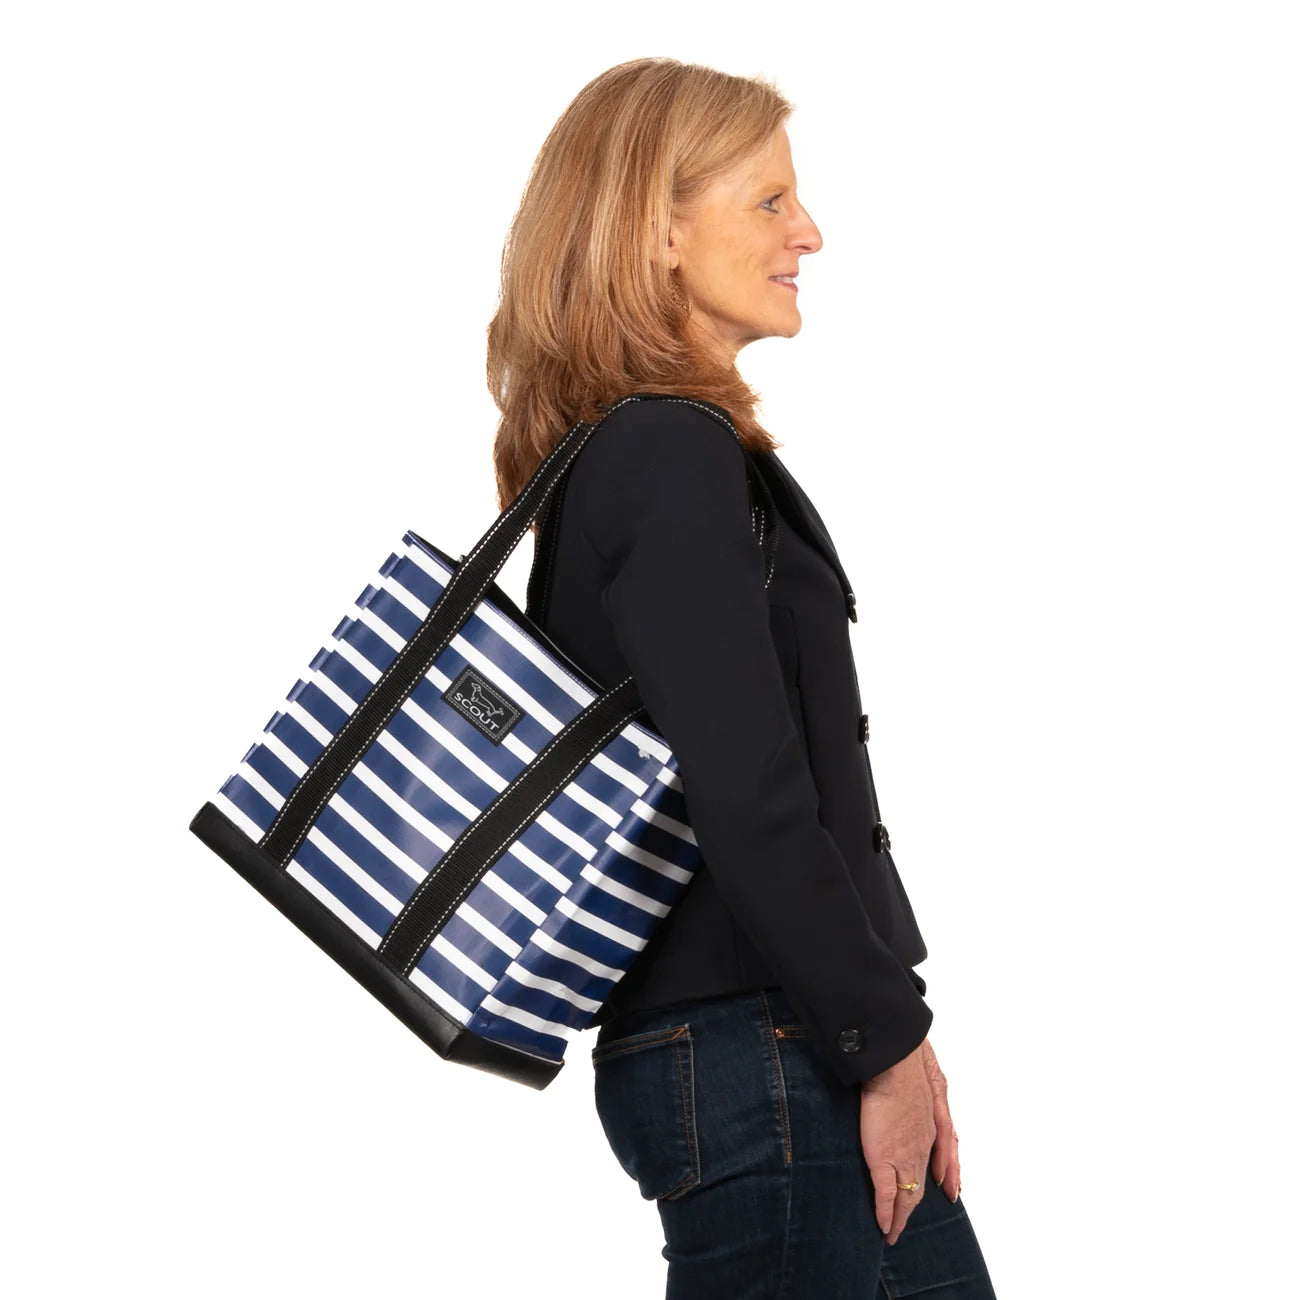 Nantucket Navy Mini Deano Tote Bag by Scout